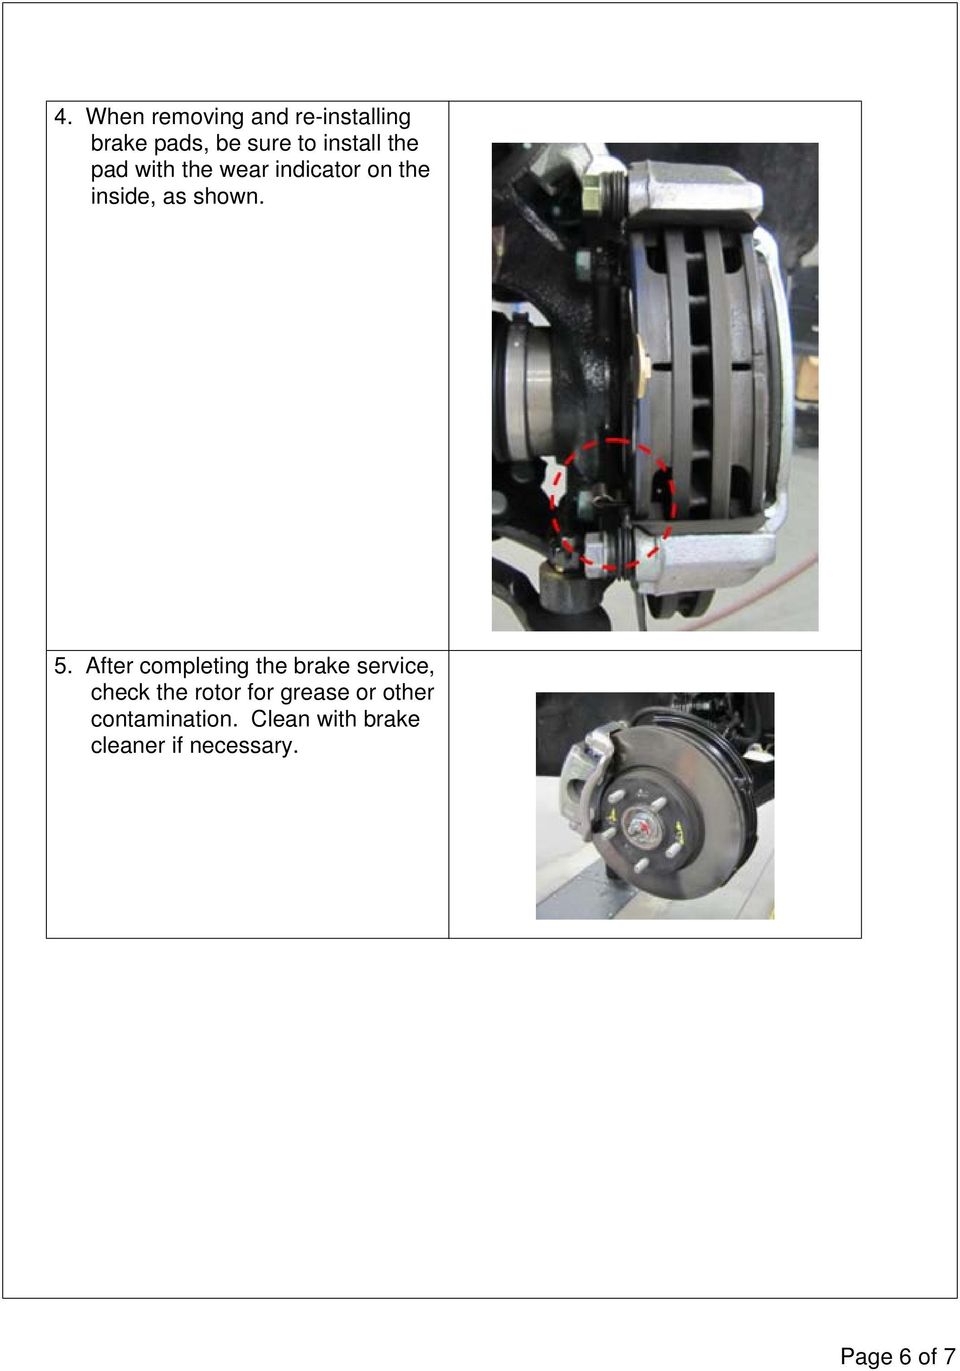 After completing the brake service, check the rotor for grease or